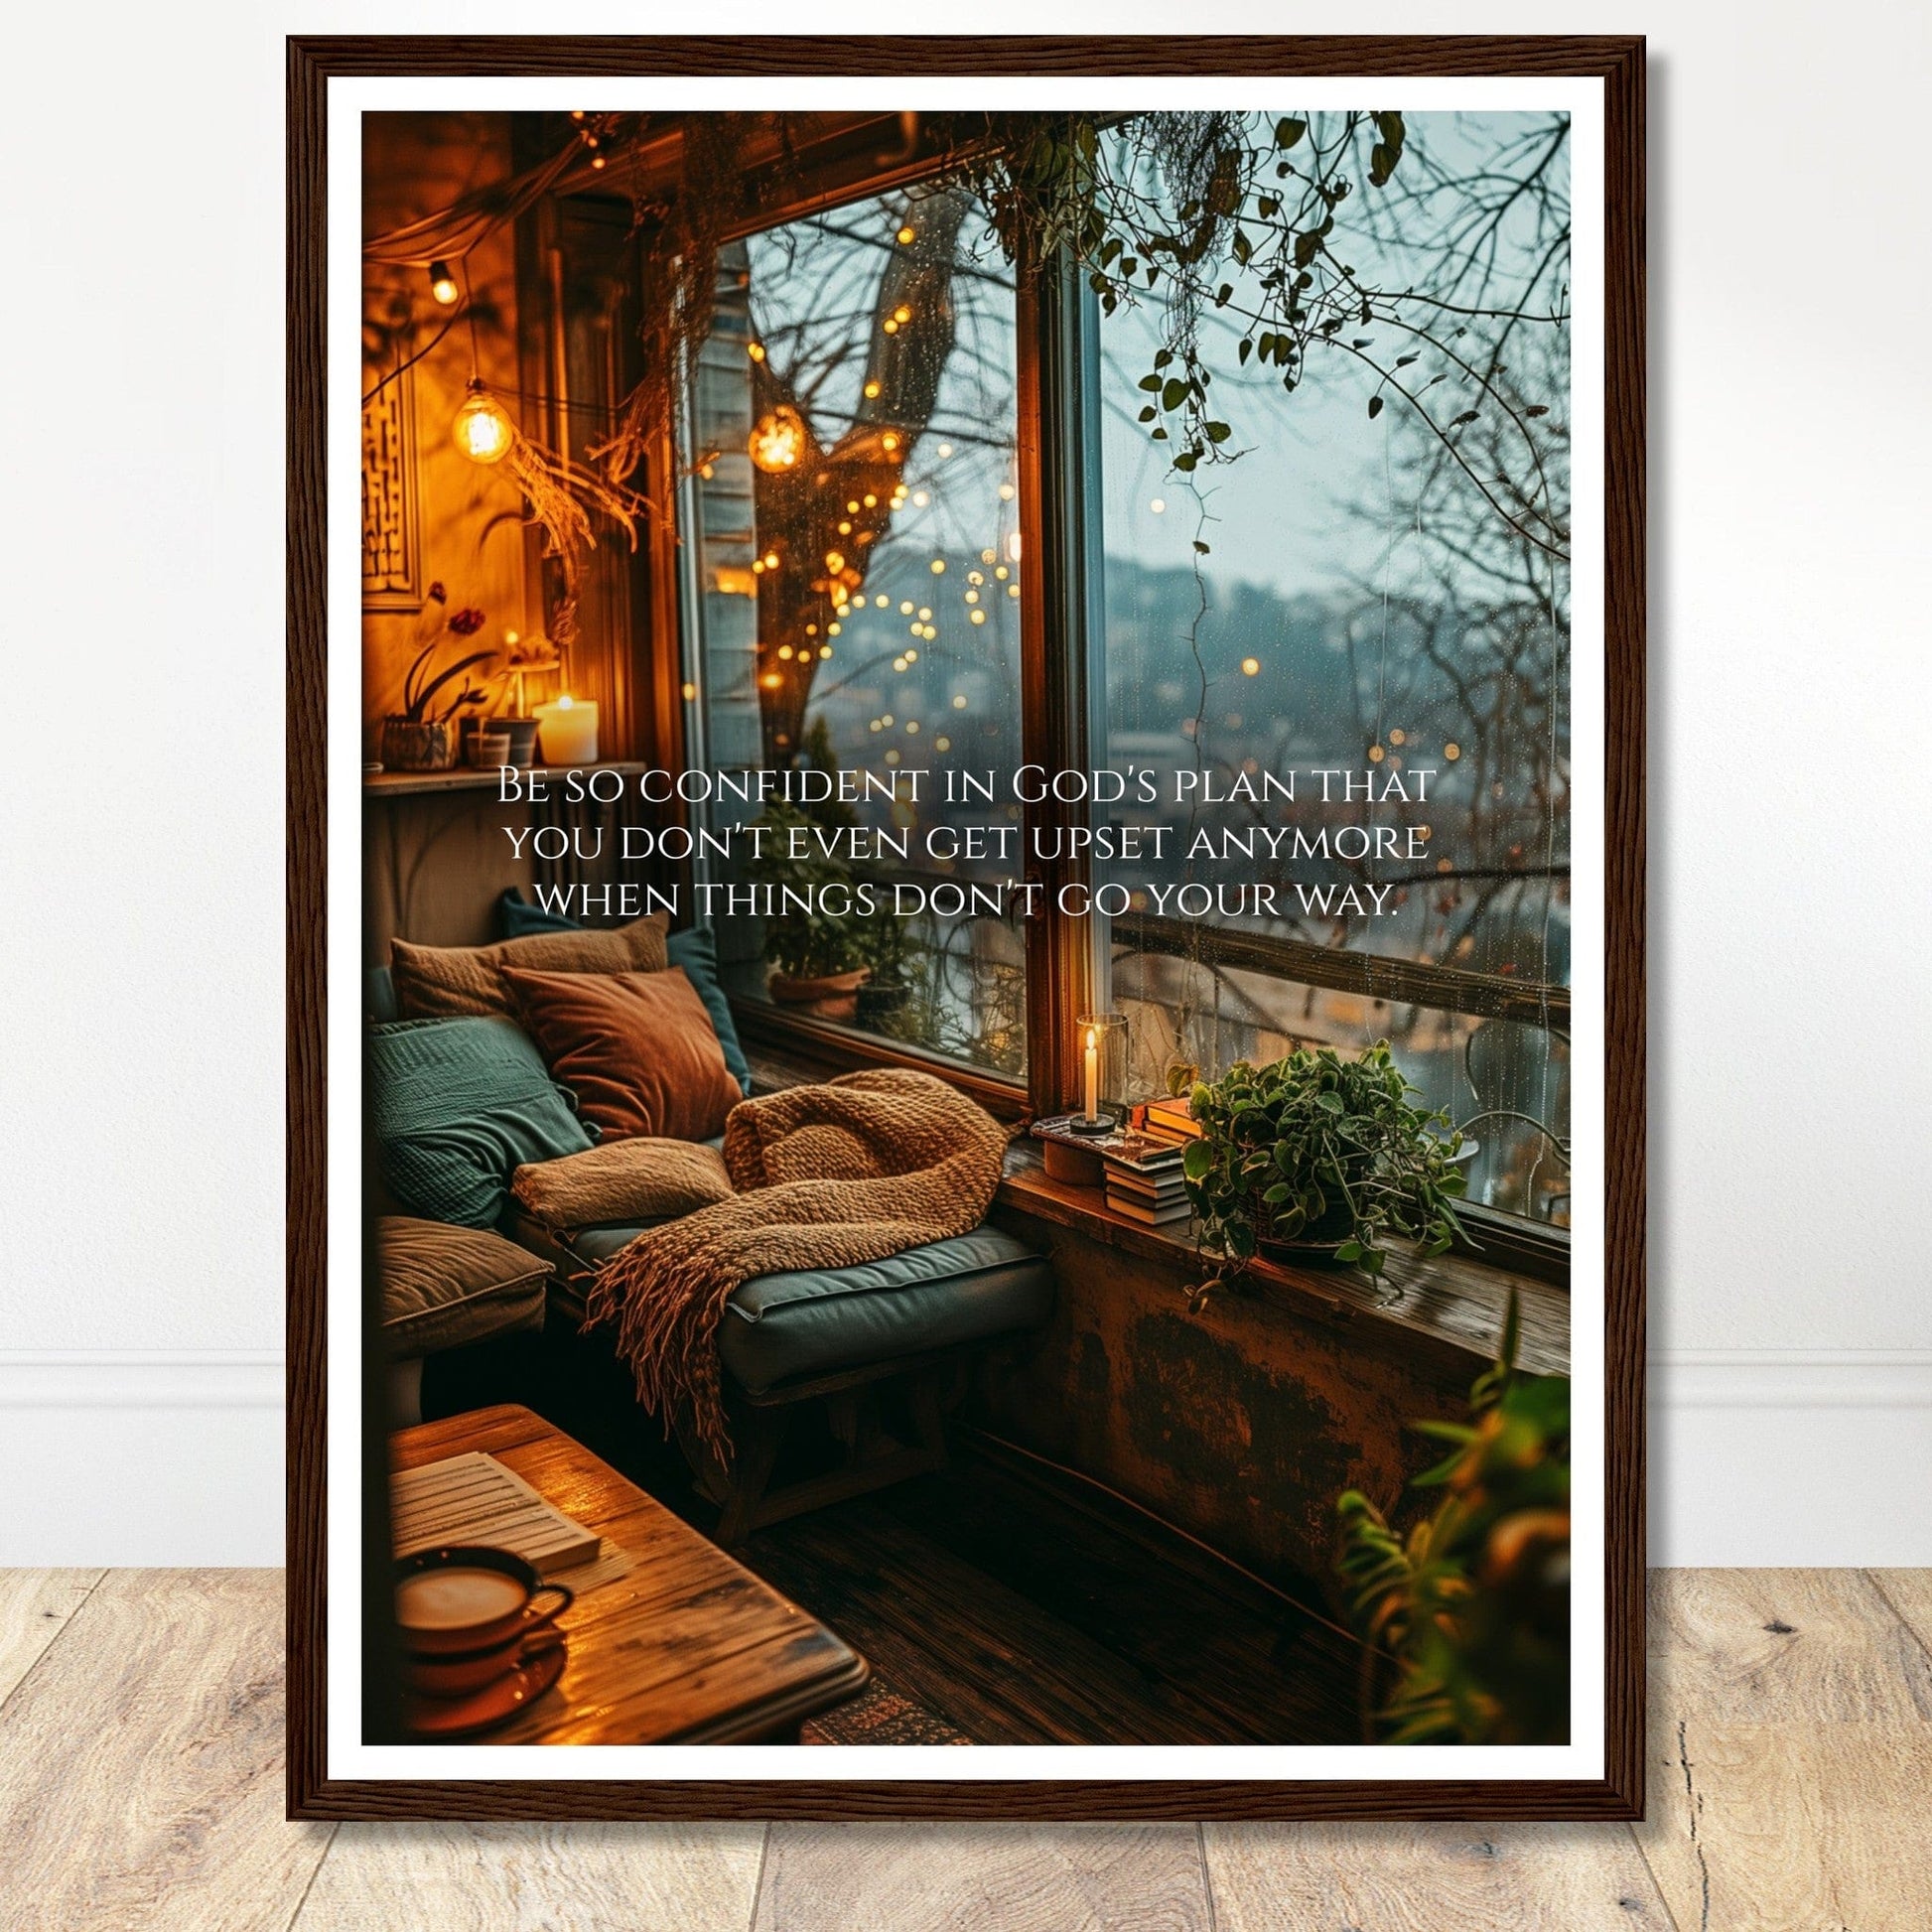 Coffee With My Father Print Material 45x60 cm / 18x24″ / Premium Matte Paper with Frame / Dark wood frame Be Confident In God's Plan - Customizable Christian Artwork